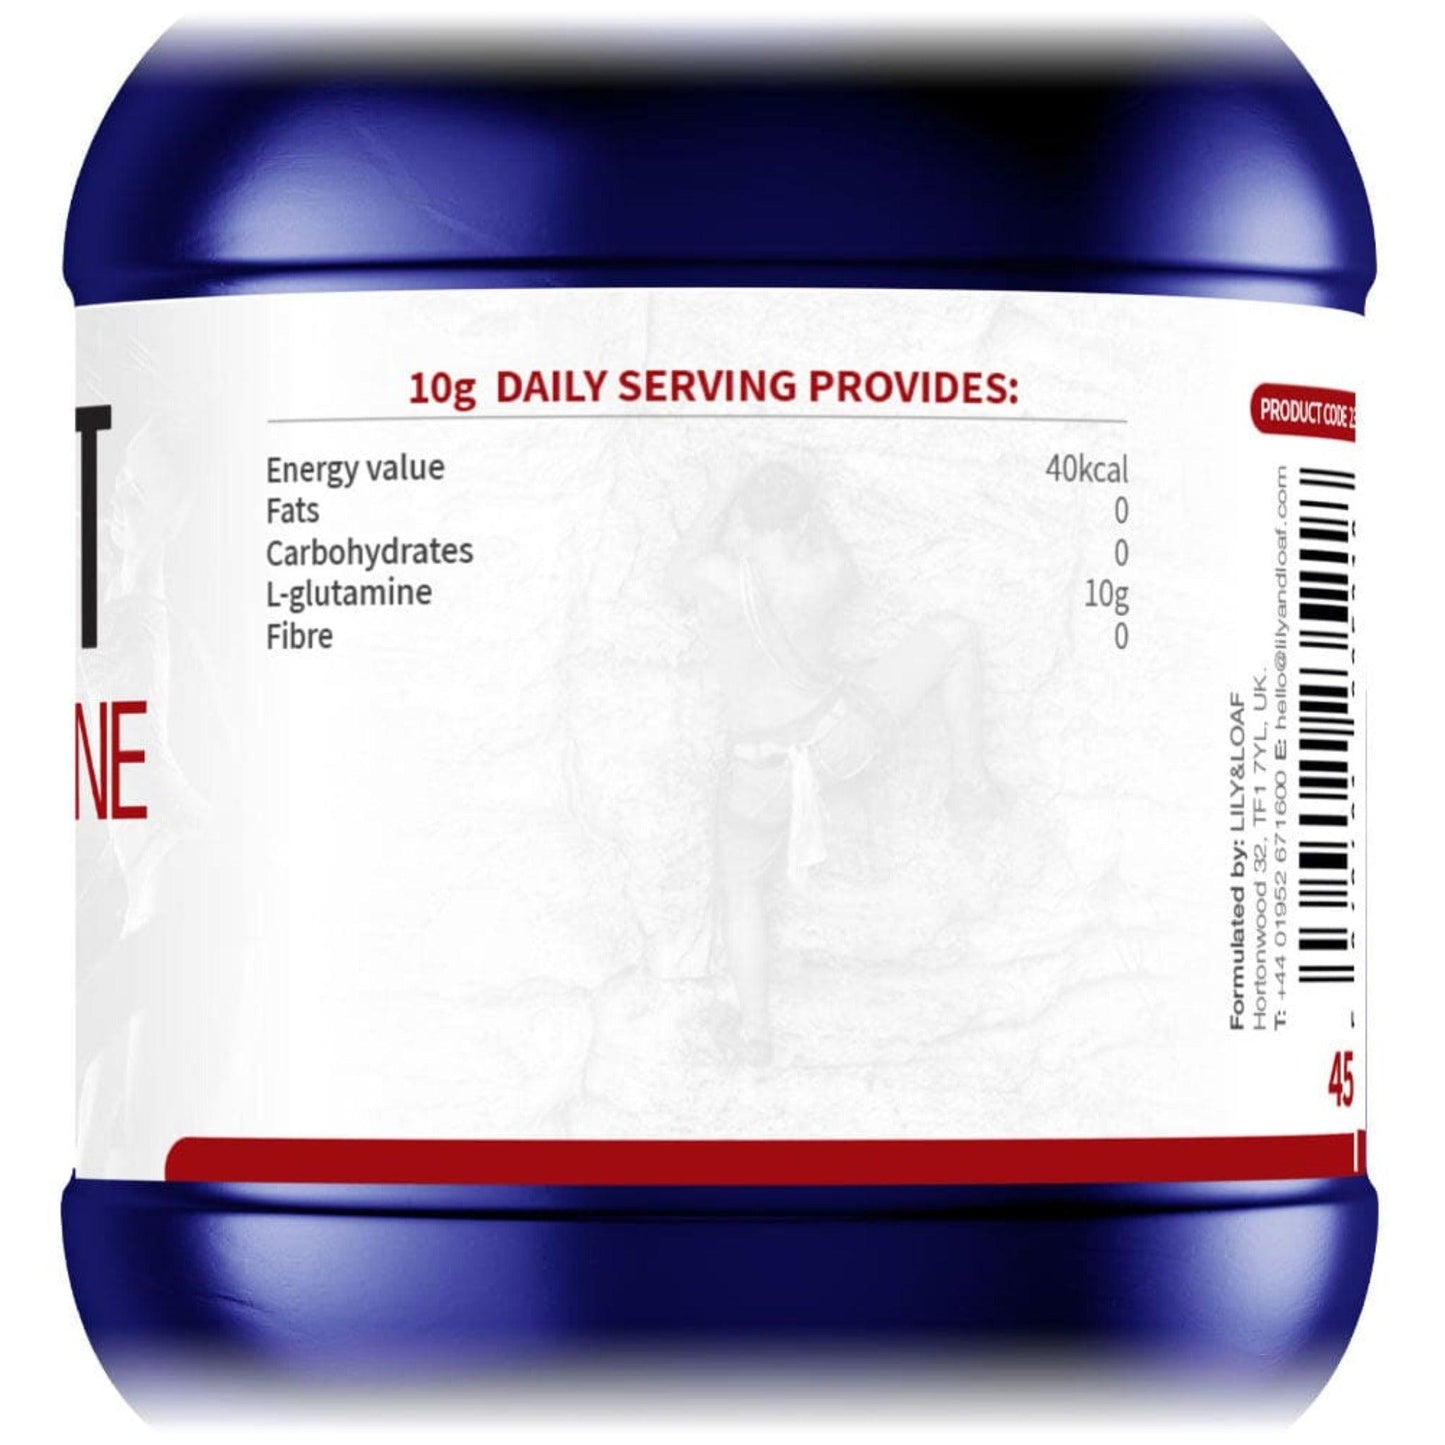 Acti-Fit High Strength L-Glutamine Powder label showing nutritional profile